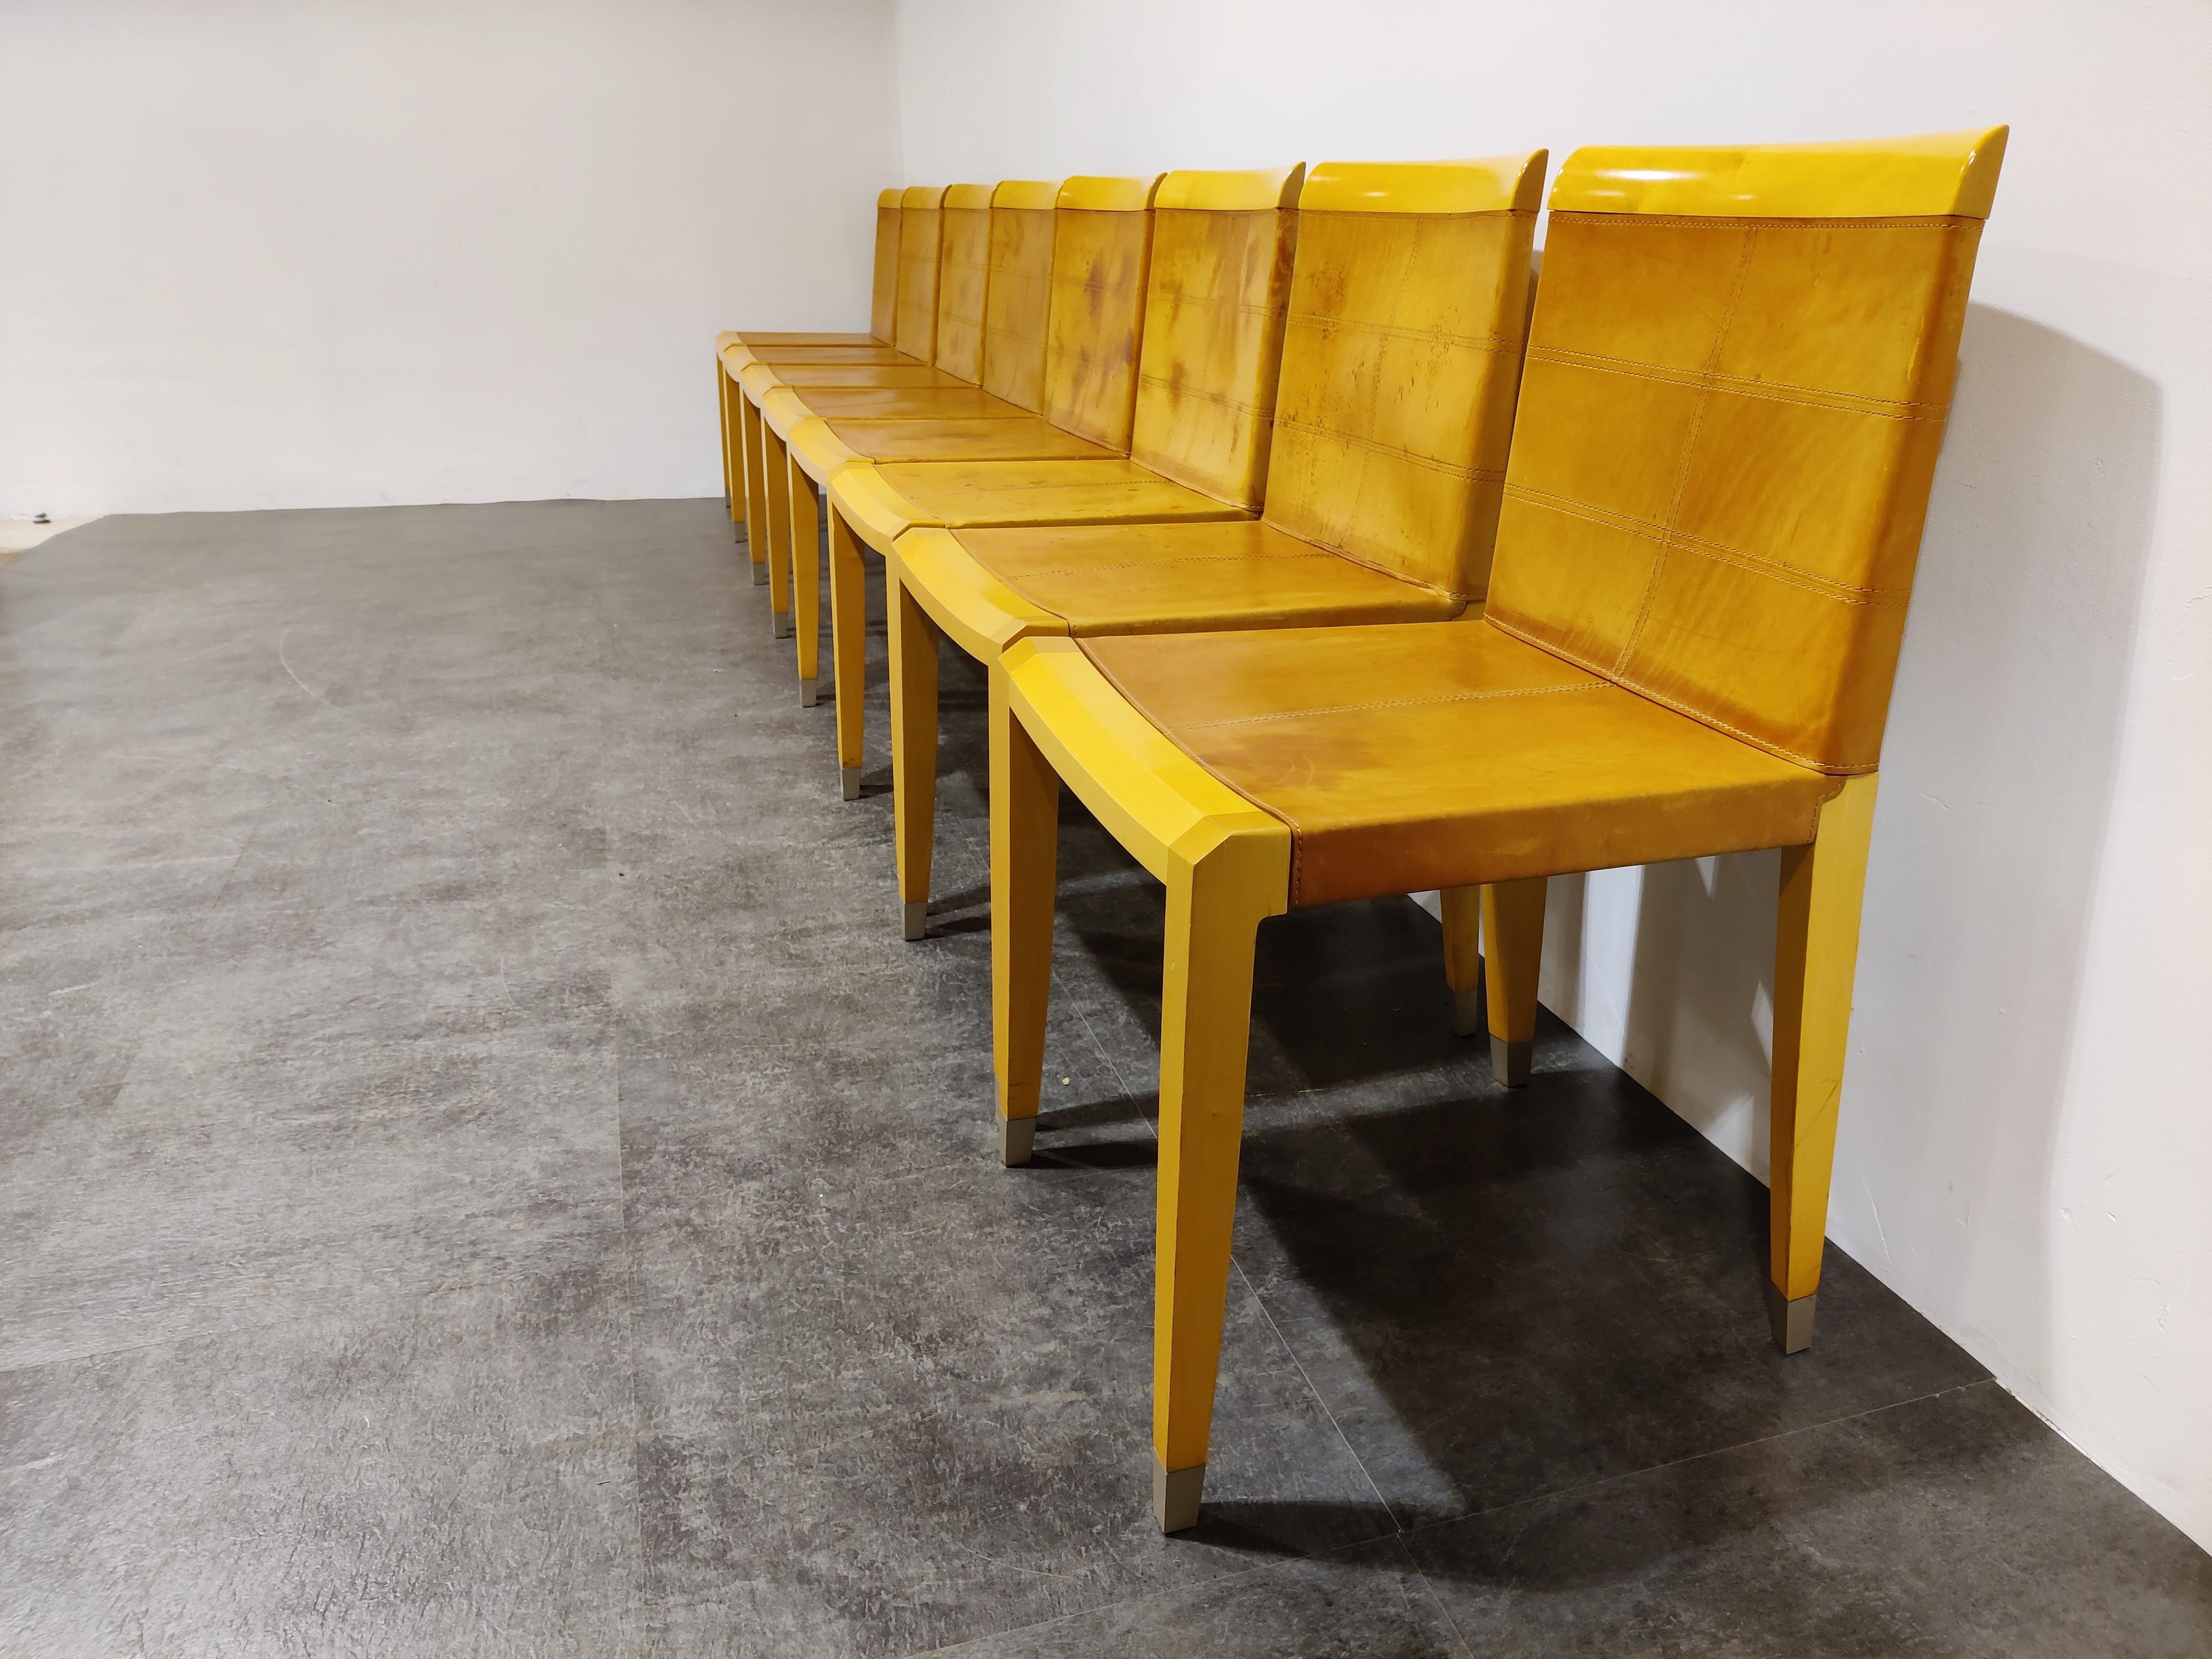 1990s dining chairs with cherry wooden frames, metal foot caps and brown patinated saddel leather upholstery.

The chairs have abeaiutiful, sleek and elegant design and live up to the high quality Giorgetti standards.

These chairs date from the